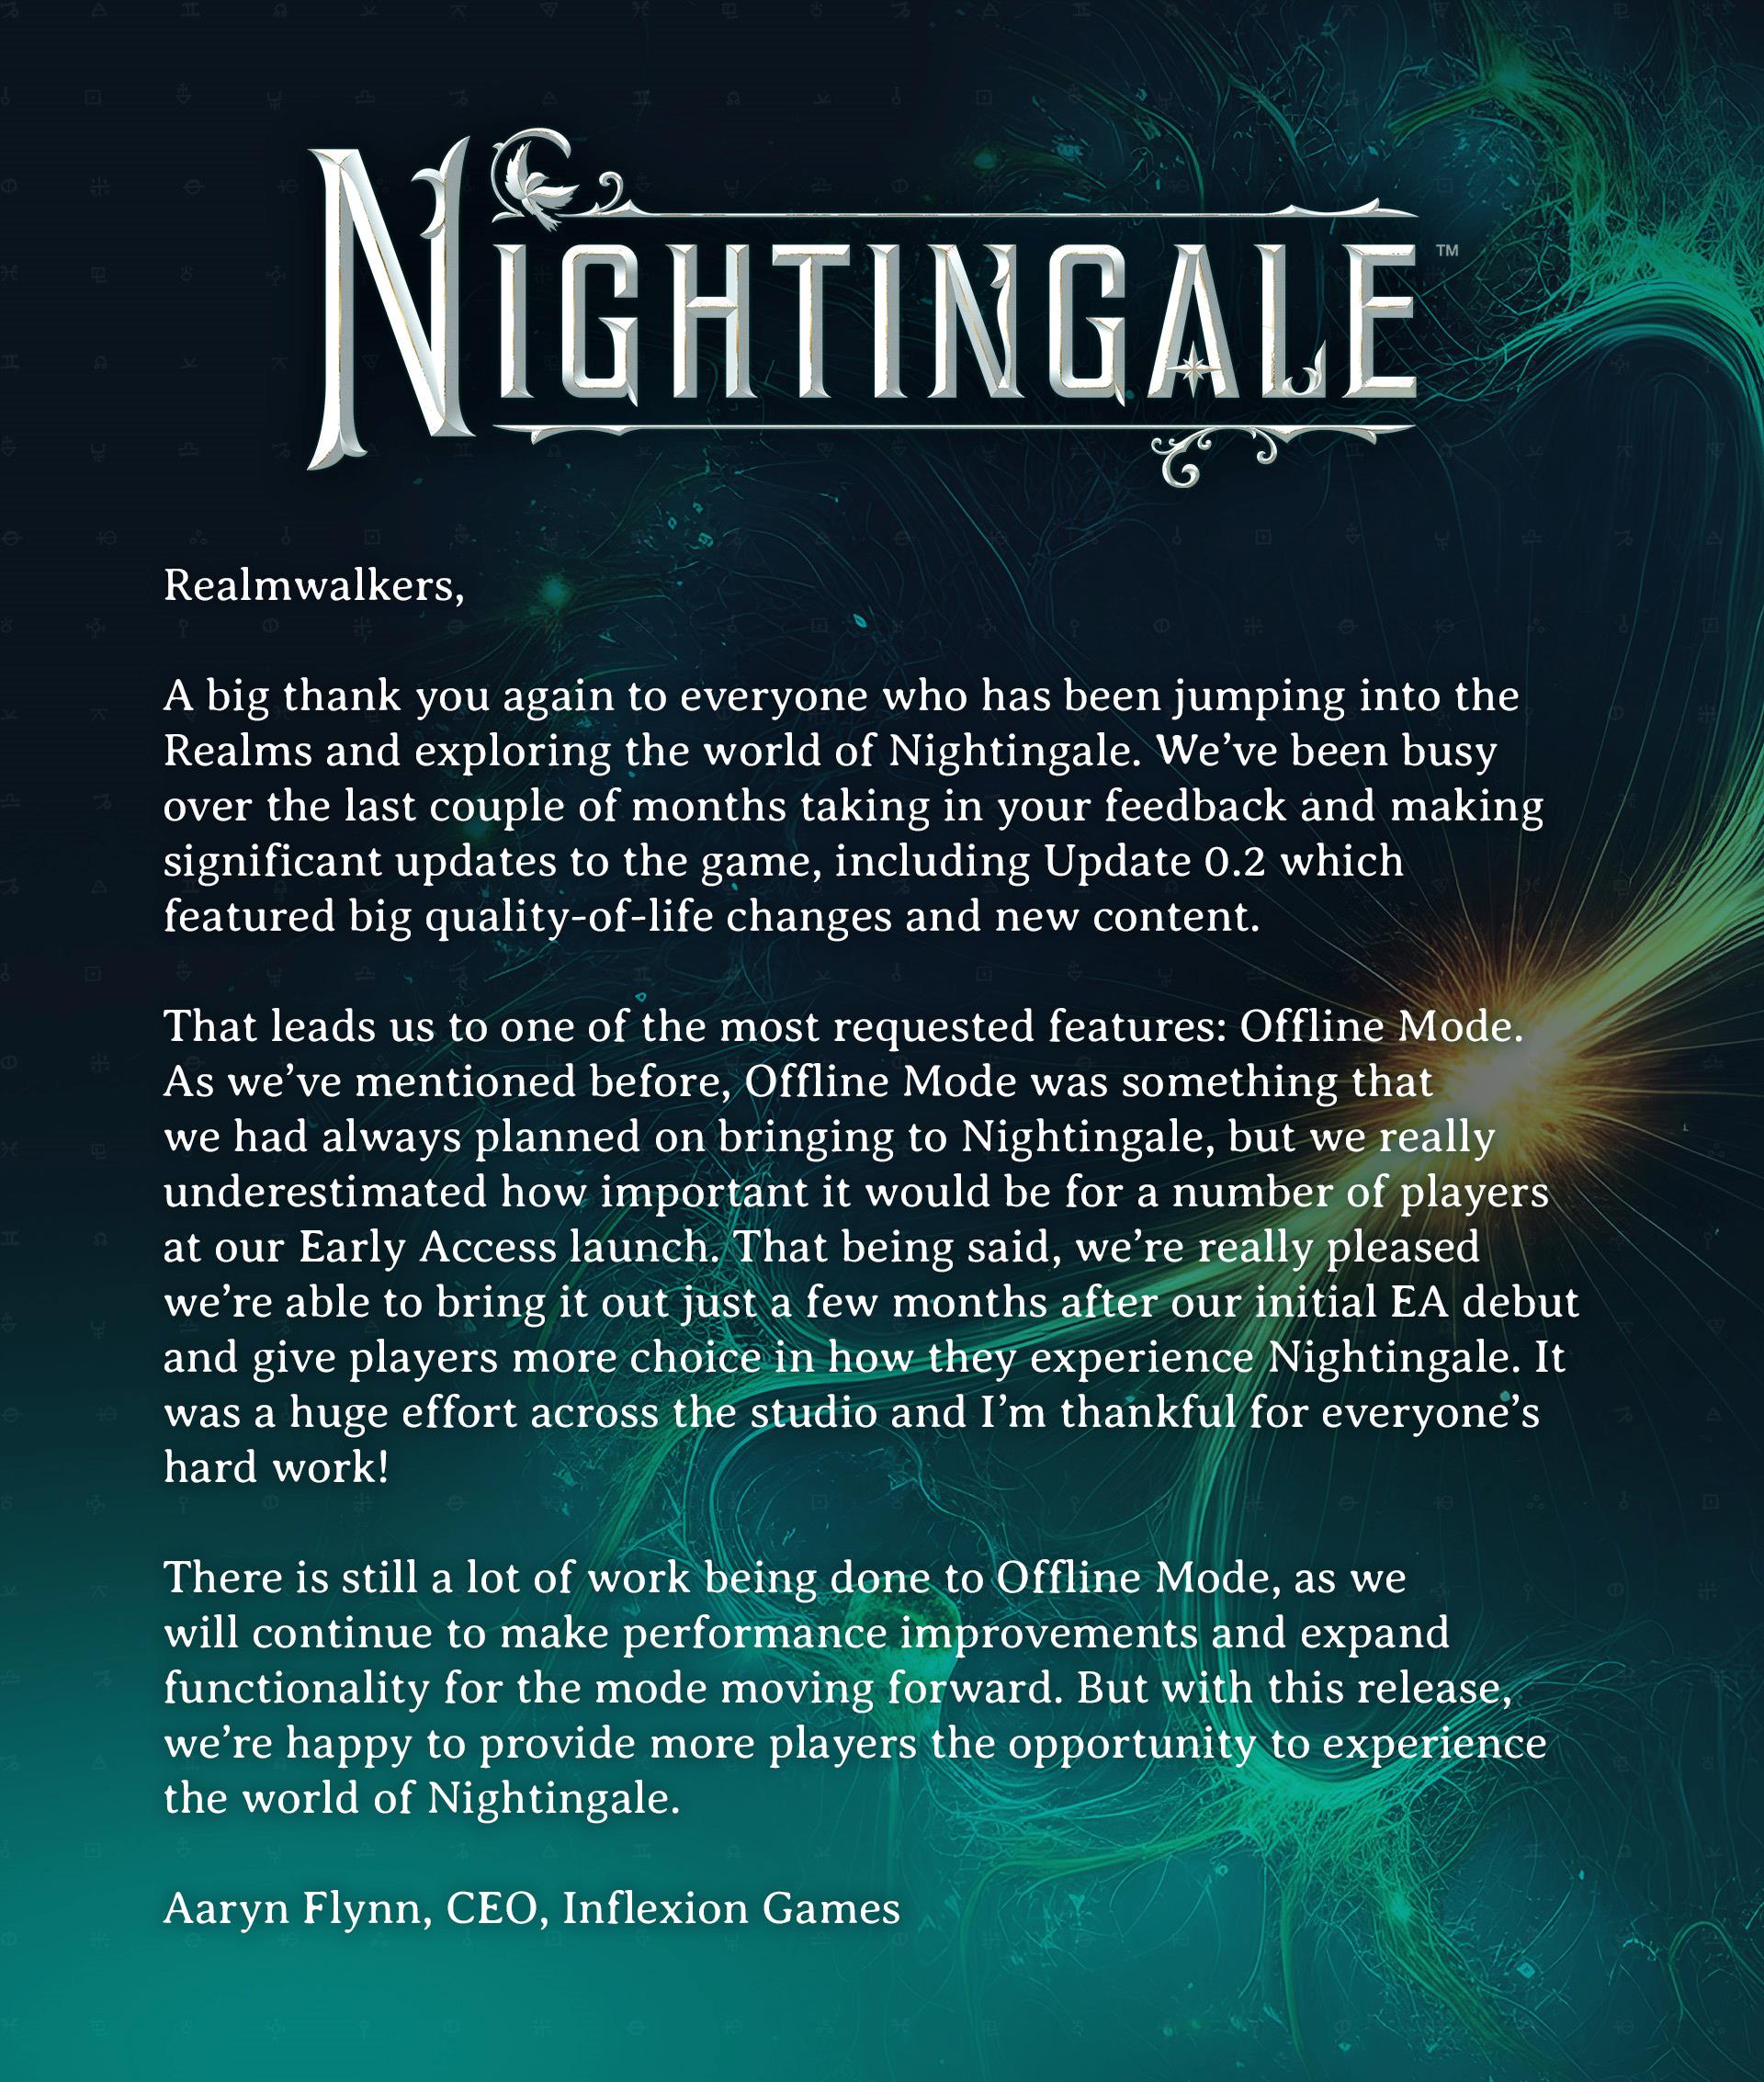 Nightingale CEO release an annoucement.